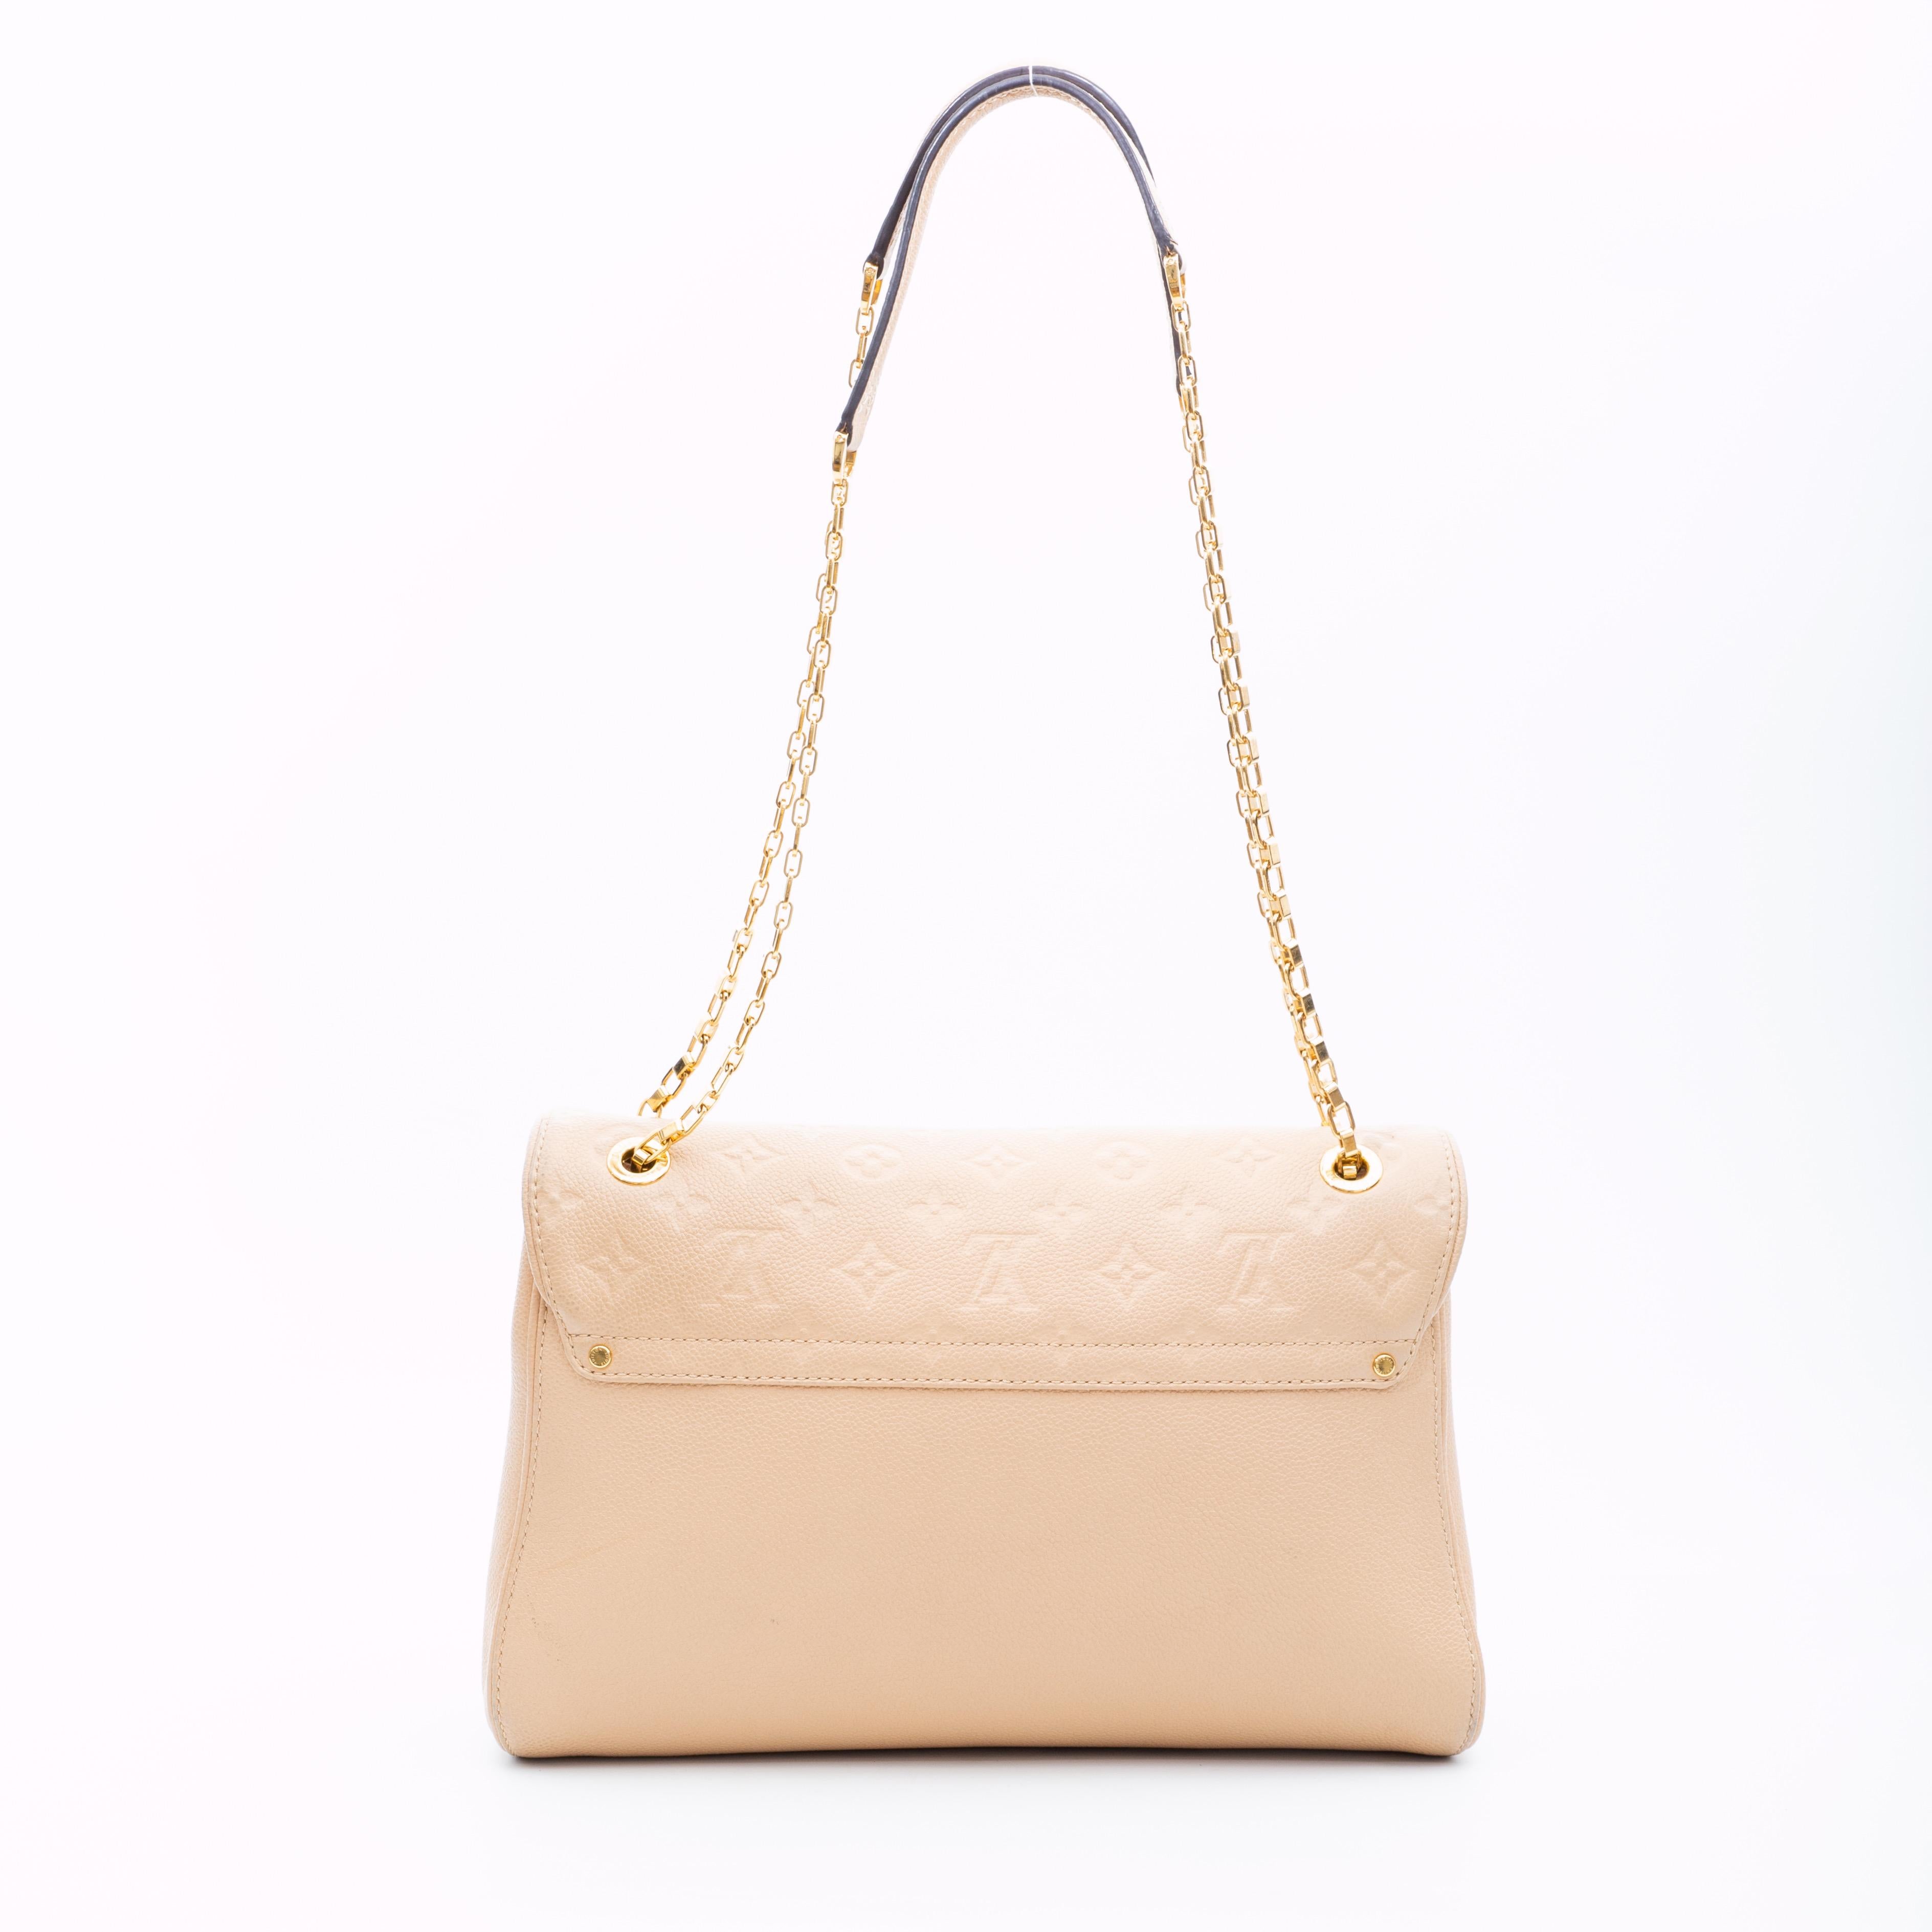 This bag is made from a supple grained cowhide called Empreinte leather with Louis Vuitton's signature monogram pattern embossed. The bag features a beige exterior, light gold tone hardware, a chain link shoulder strap for comfortable carry,